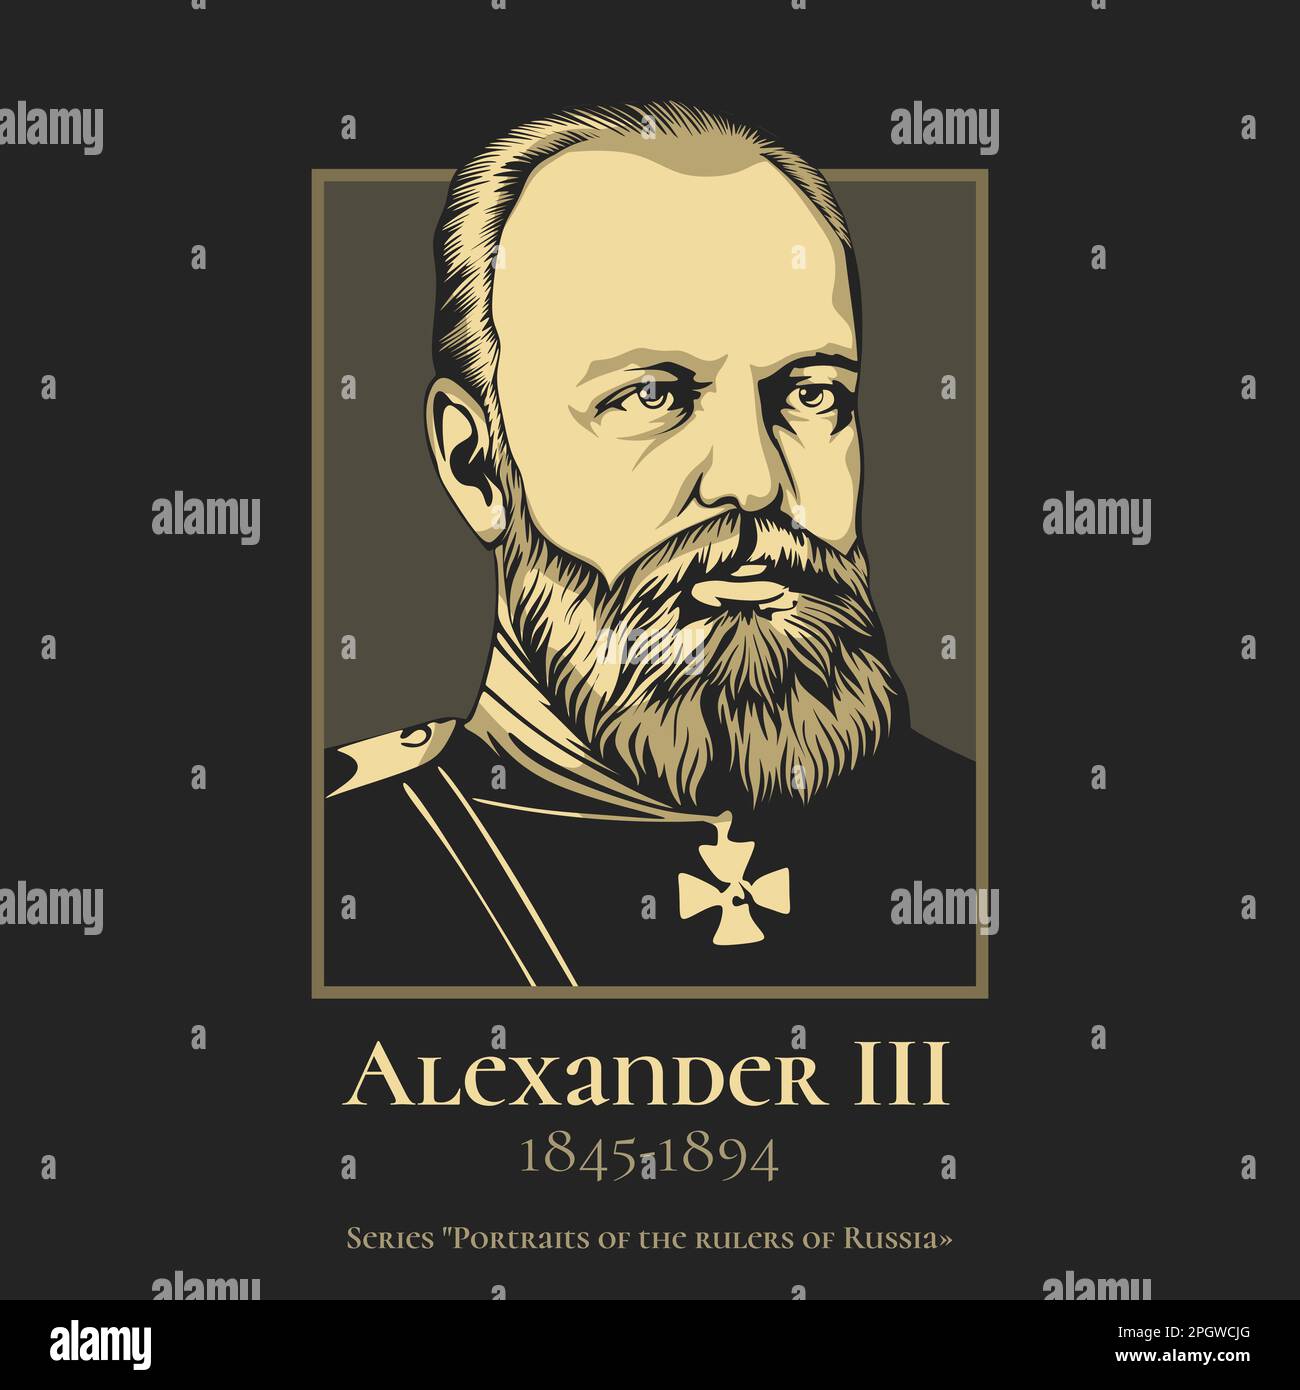 Alexander III (1845-1894) was Emperor of Russia, King of Congress Poland and Grand Duke of Finland from 13 March 1881 until his death in 1894. Stock Vector